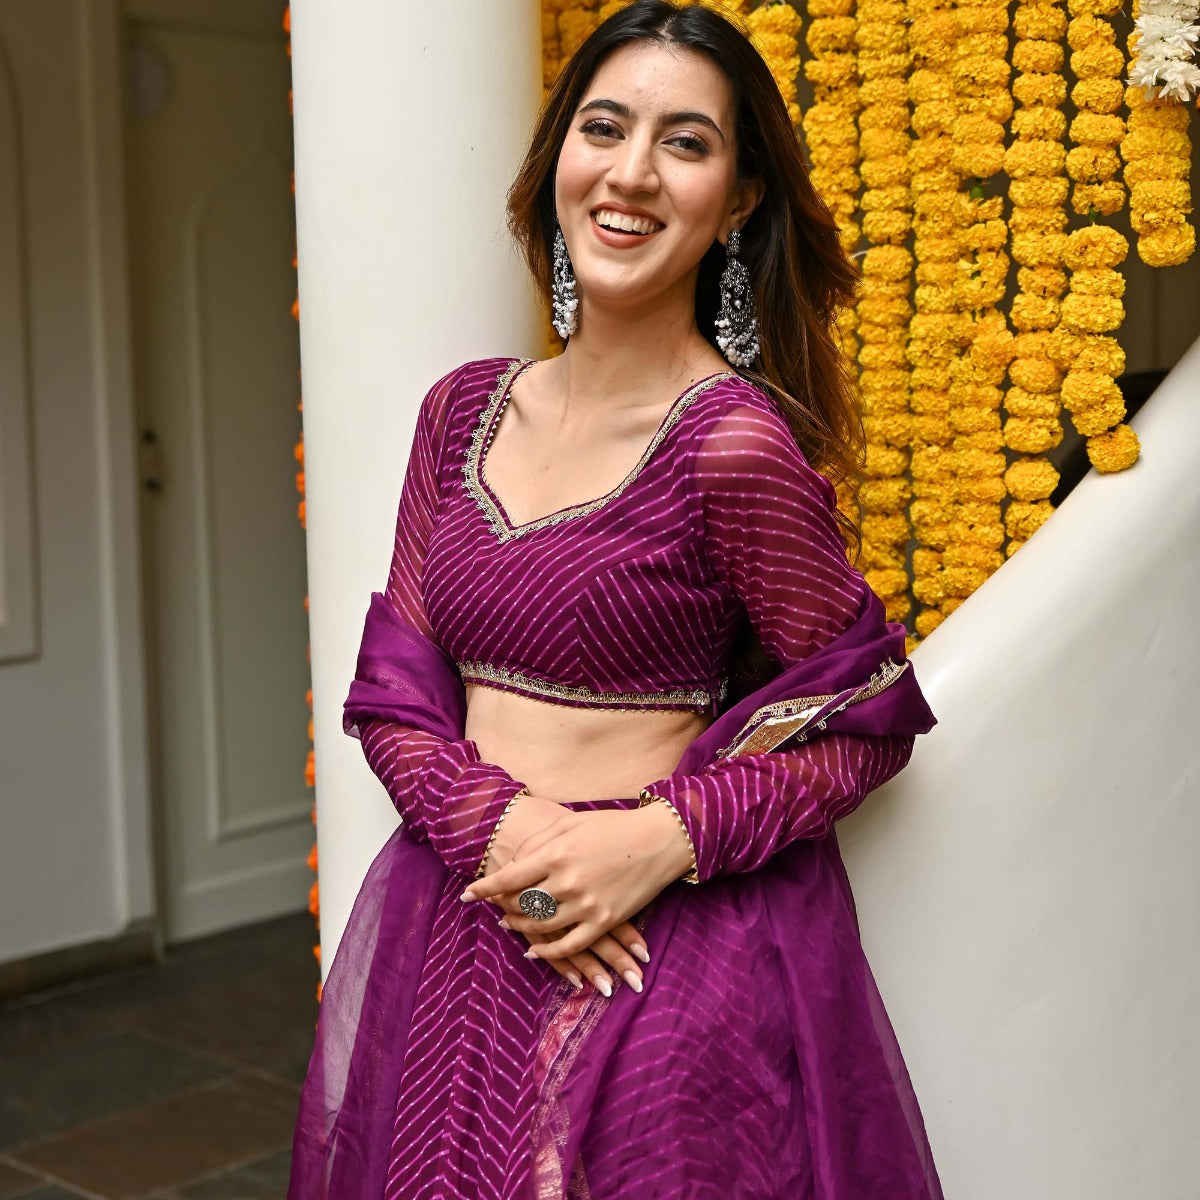 blouse full sleeves design: check latest new full sleeves blouse designs  for saree, lehenga; latest puff woolen pink black contrast blouse photos |  Times Now Navbharat